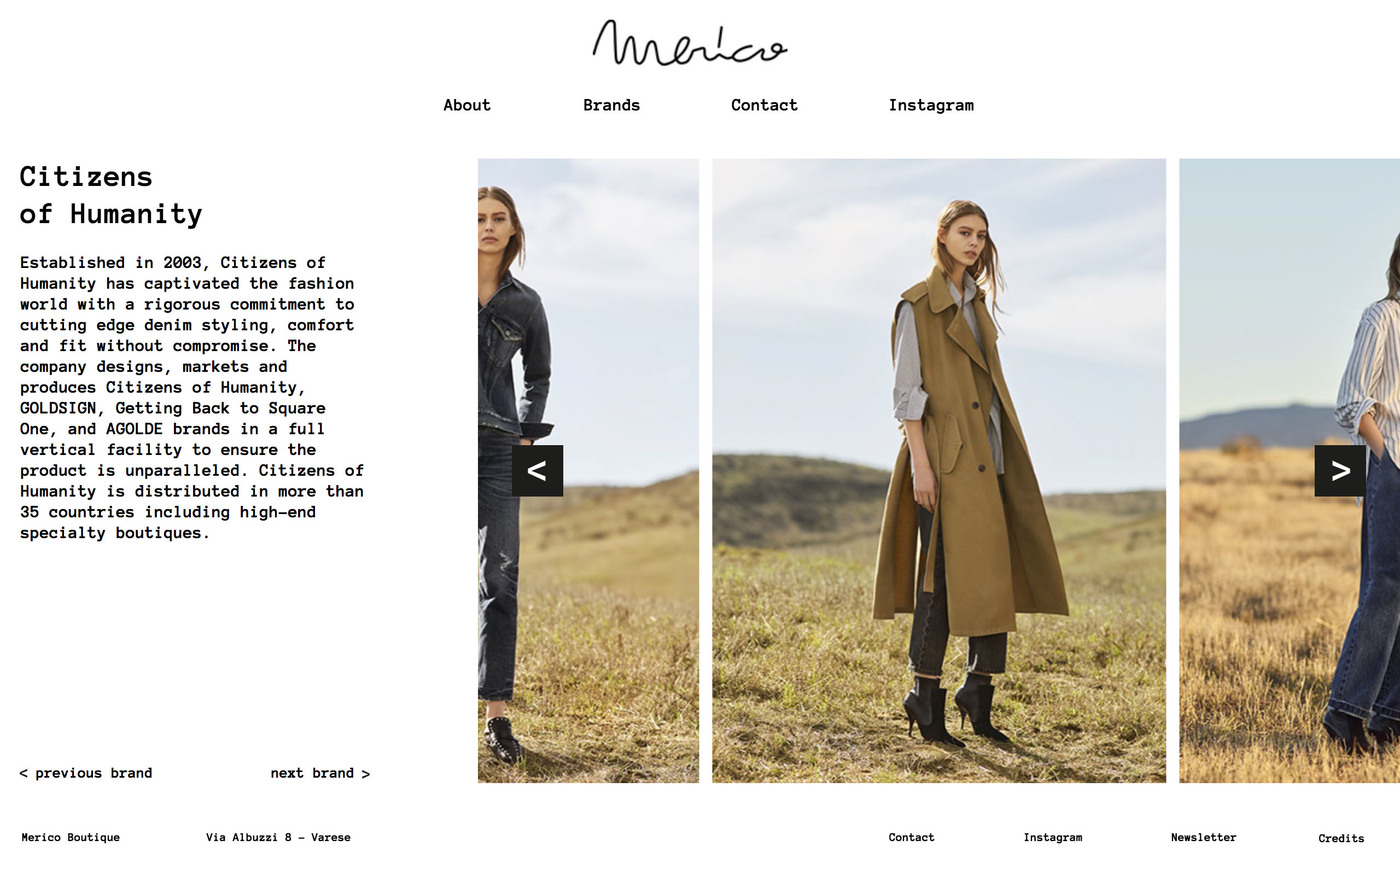 Merico Boutique website - Fonts In Use